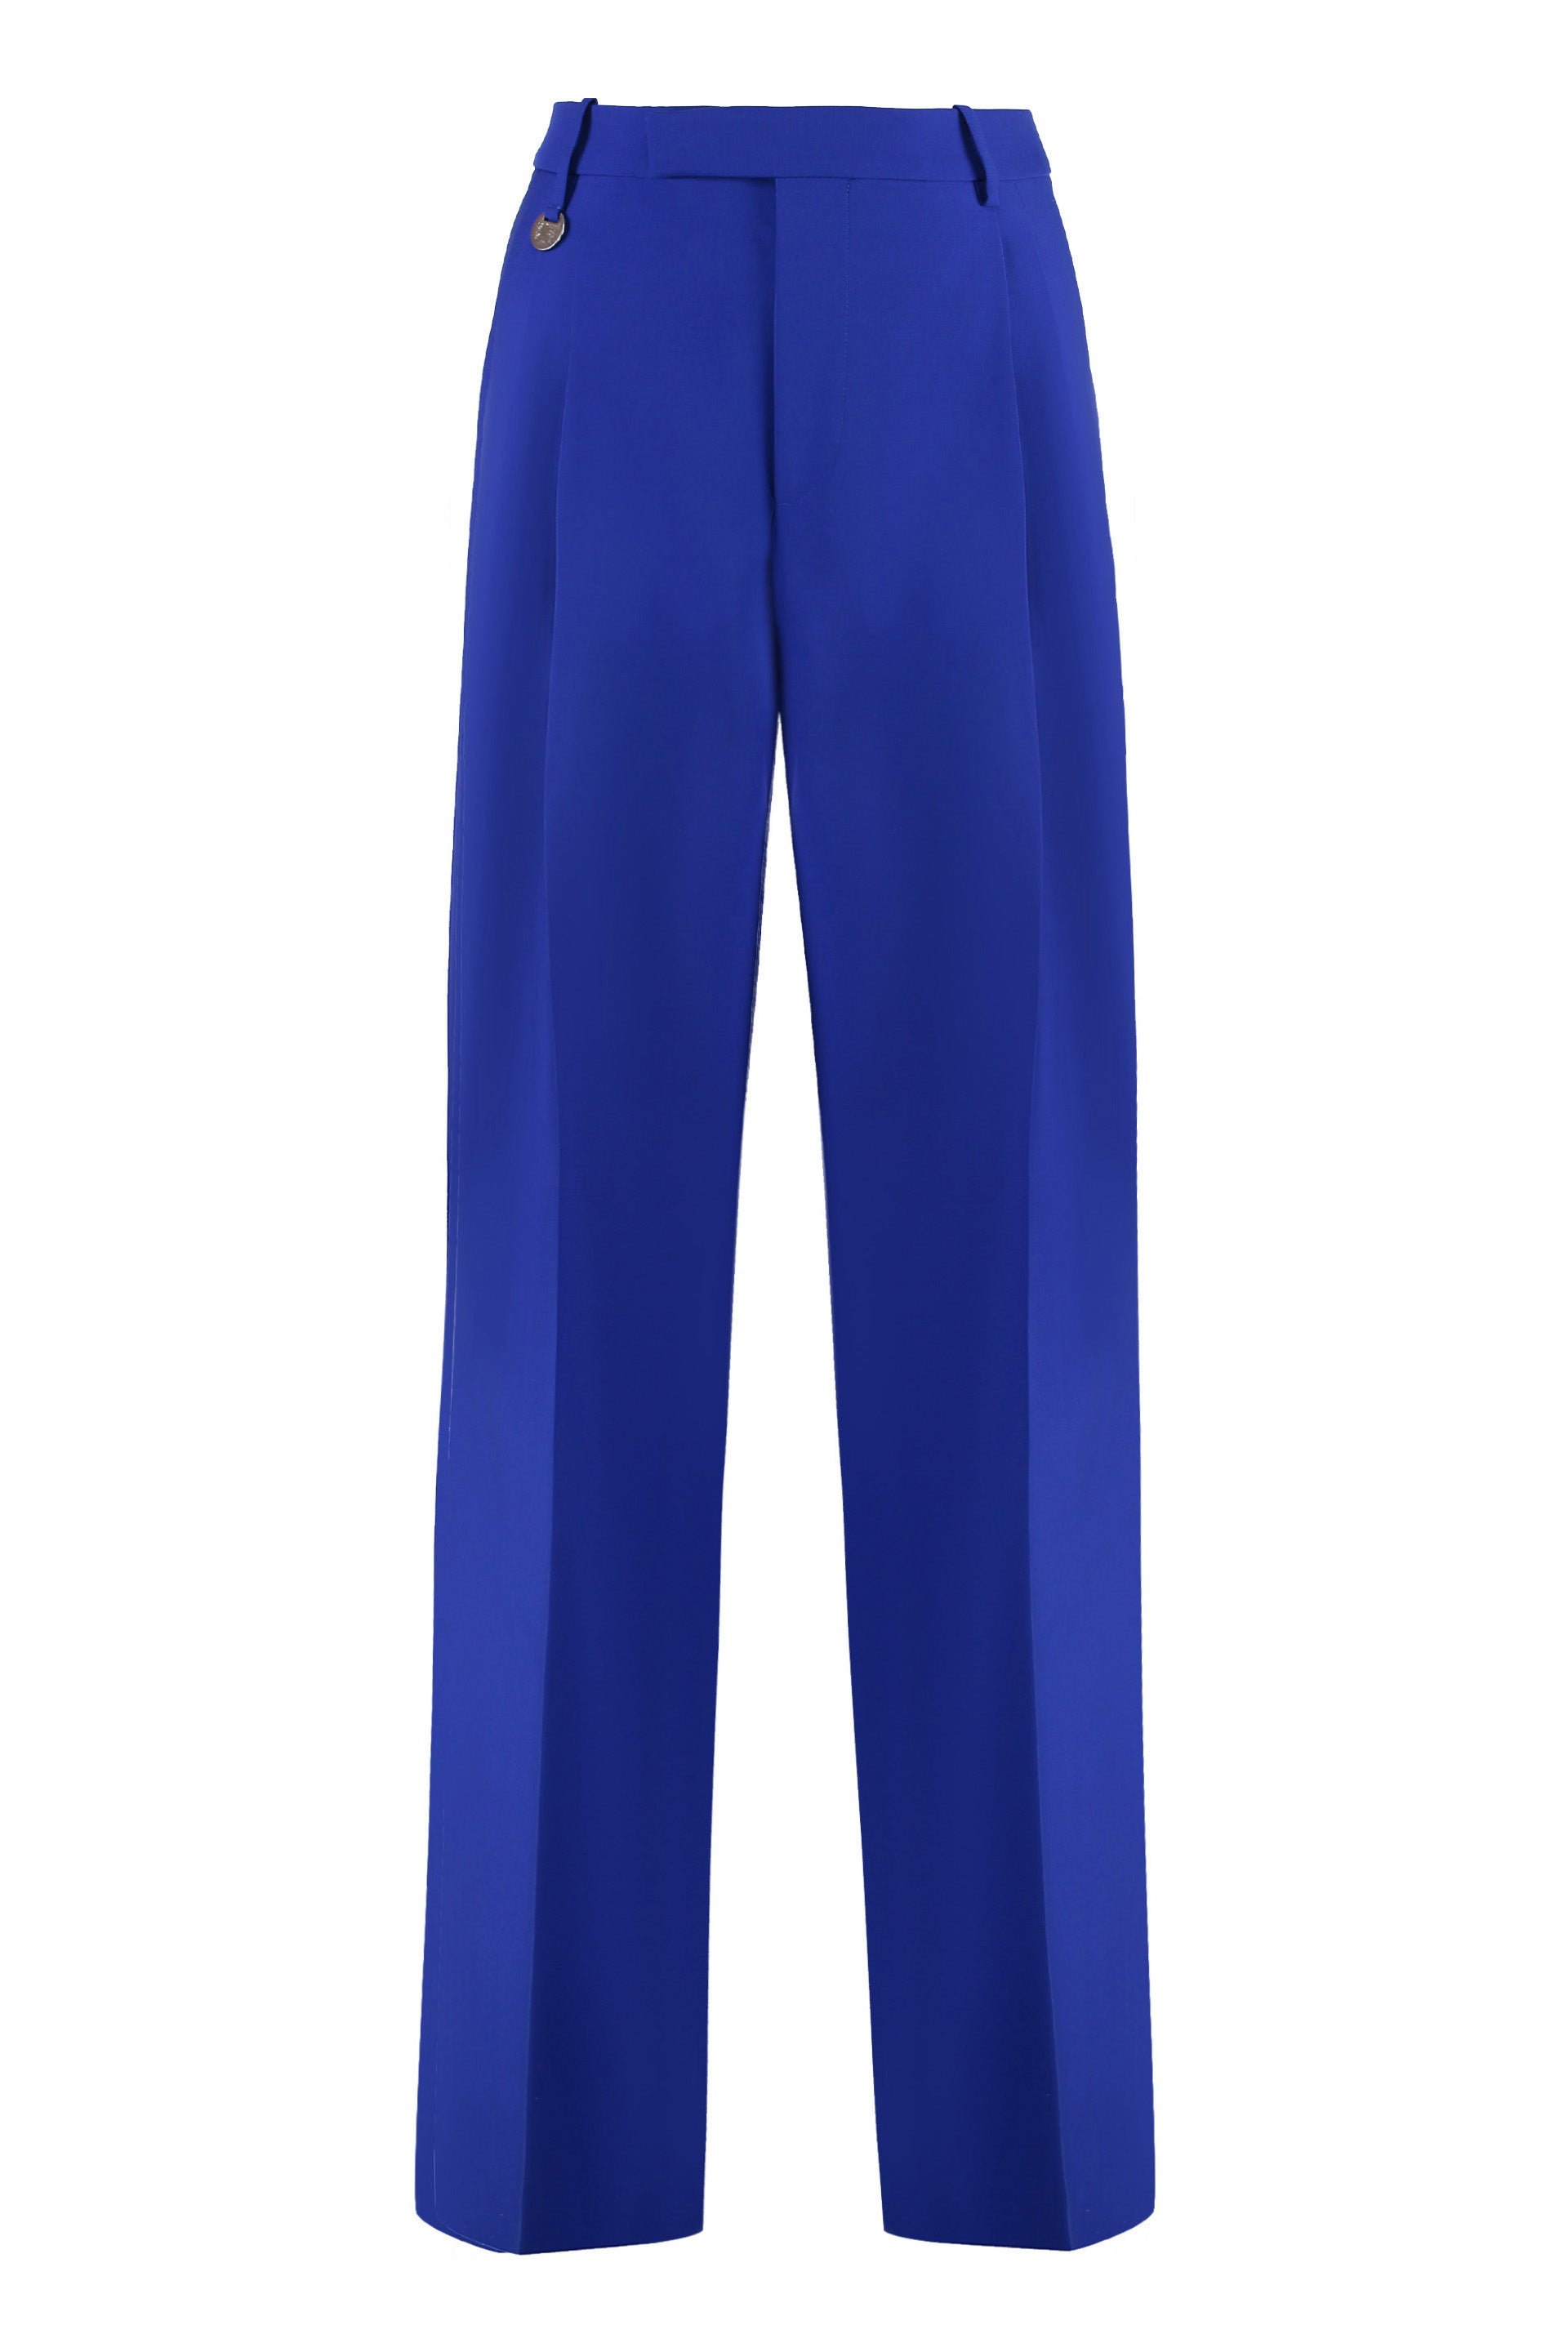 Shop Burberry Blue Virgin Wool Tailored Trousers For Women